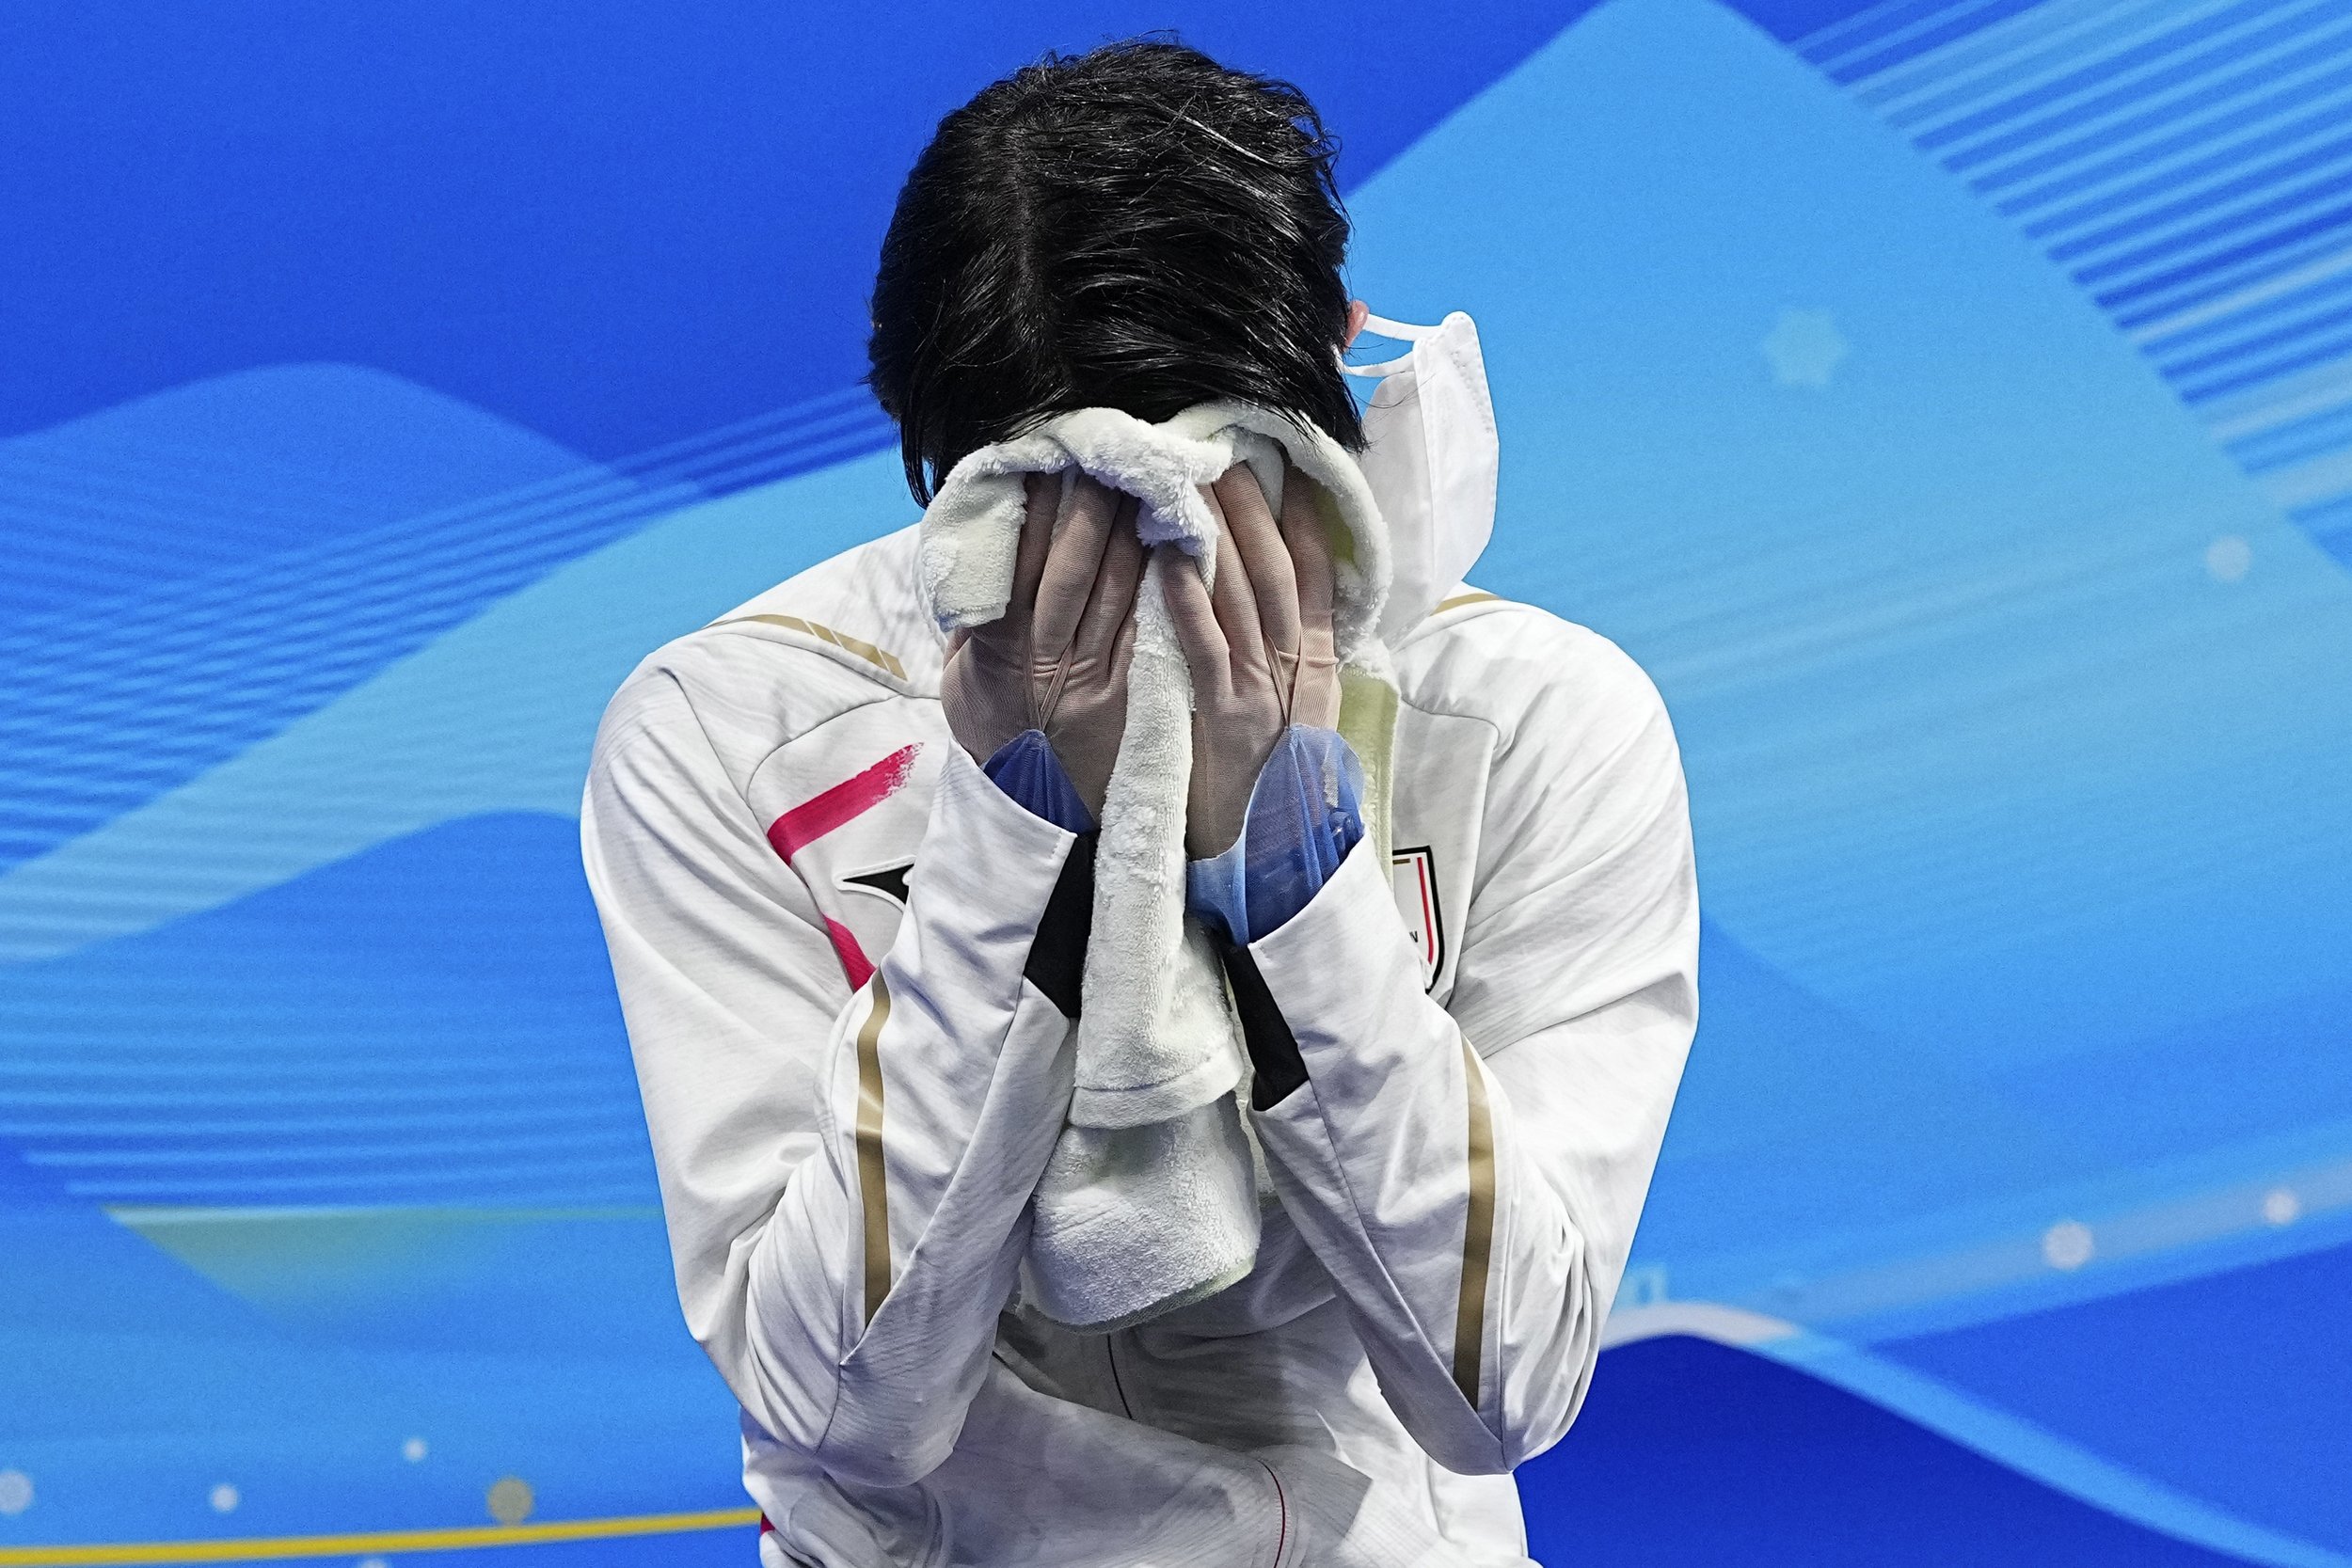  Yuzuru Hanyu, of Japan, reacts after the men's short program figure skating competition at the 2022 Winter Olympics, Tuesday, Feb. 8, 2022, in Beijing. (AP Photo/David J. Phillip) 